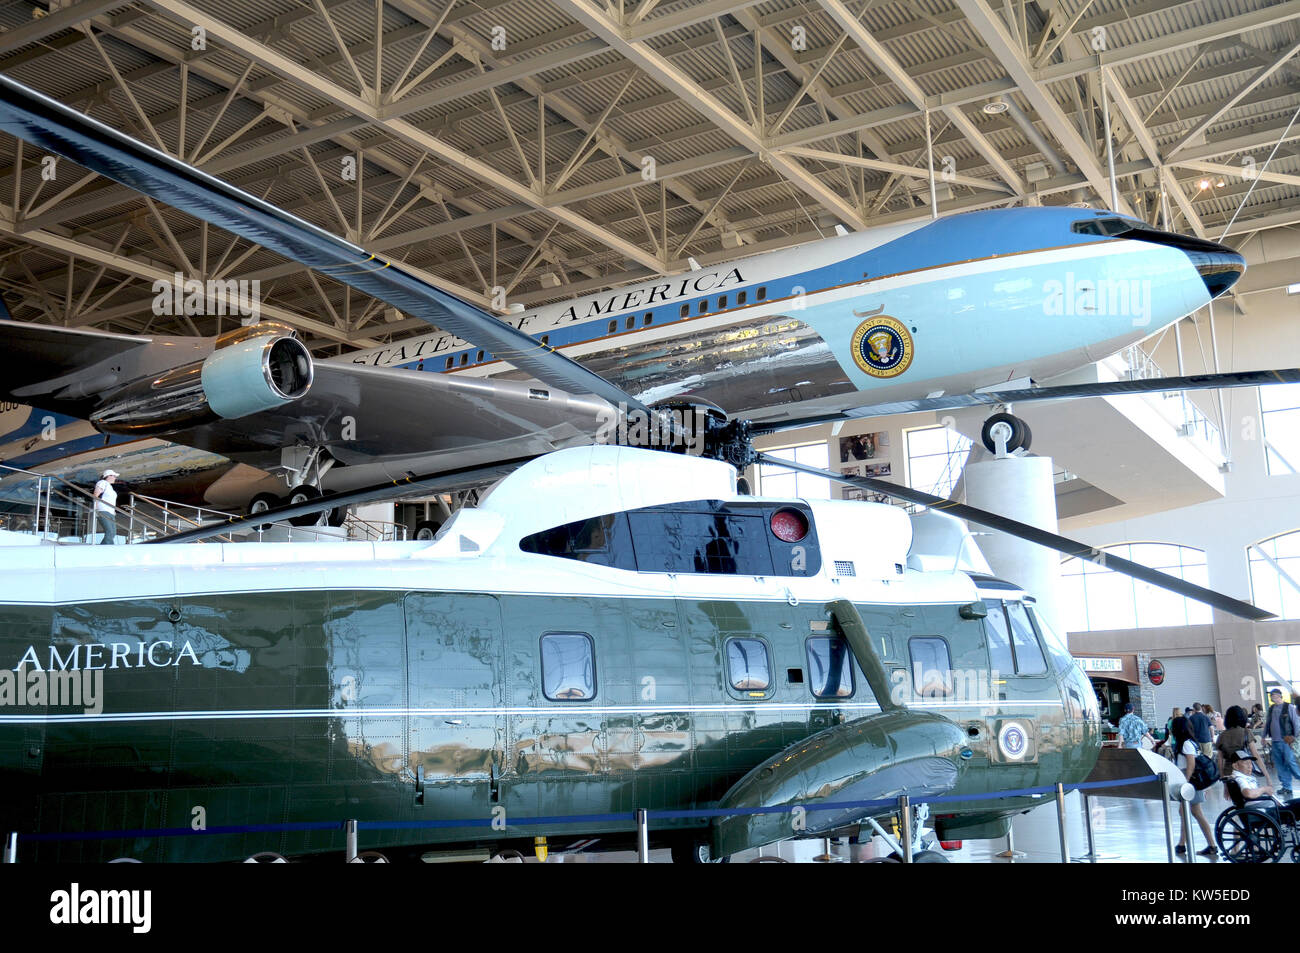 SIMI VALLEY, CA - July 24, 2010: Air Force One and Marine One on display at the Reagan Presidential Library in Simi Valley, July 24, 2010. The aircraf Stock Photo